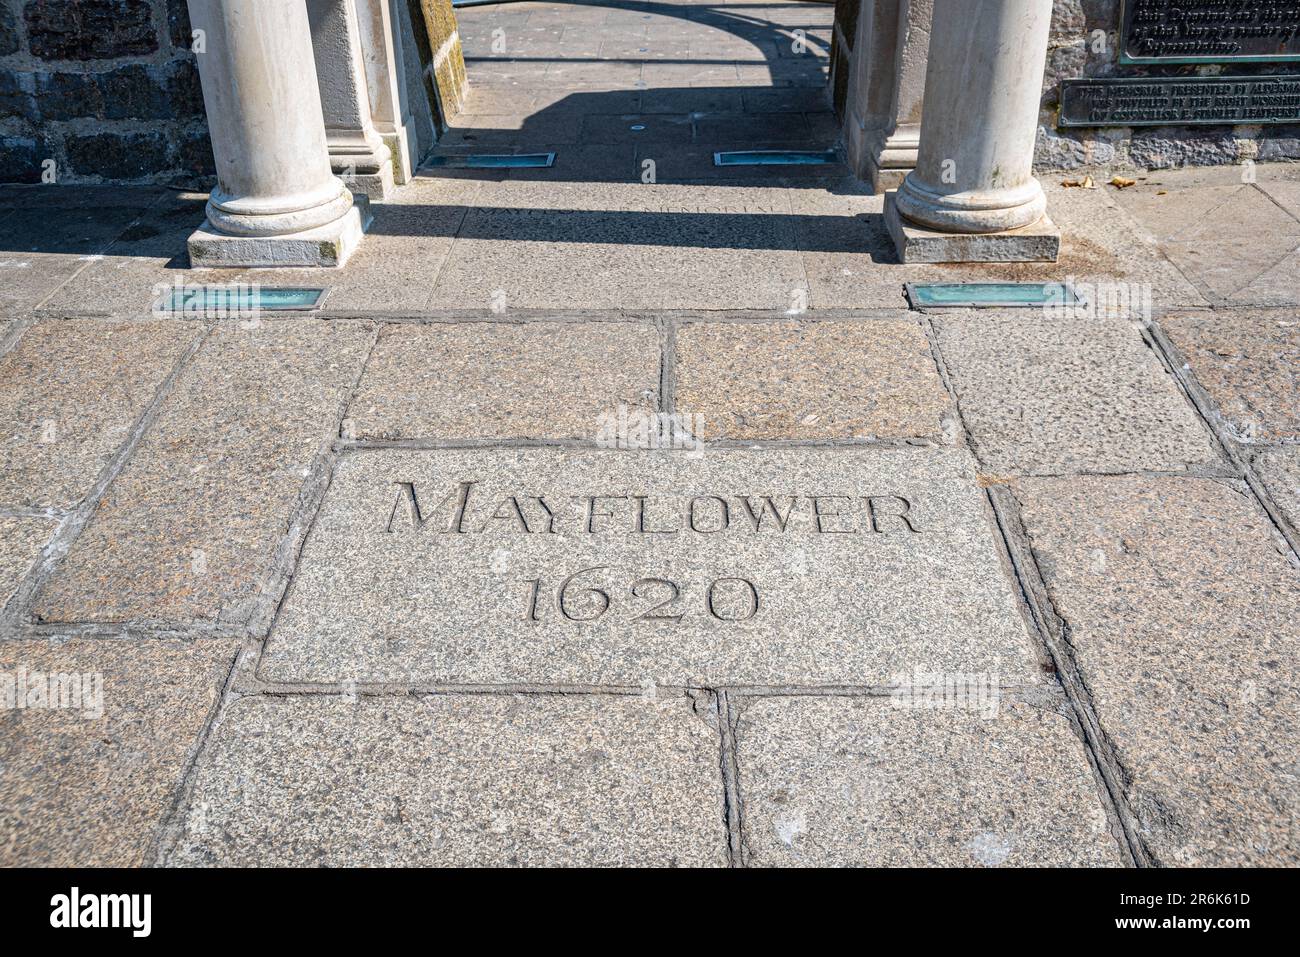 HIstoric mayflower steps in the Barbican in Plymouth, Devon. Stock Photo